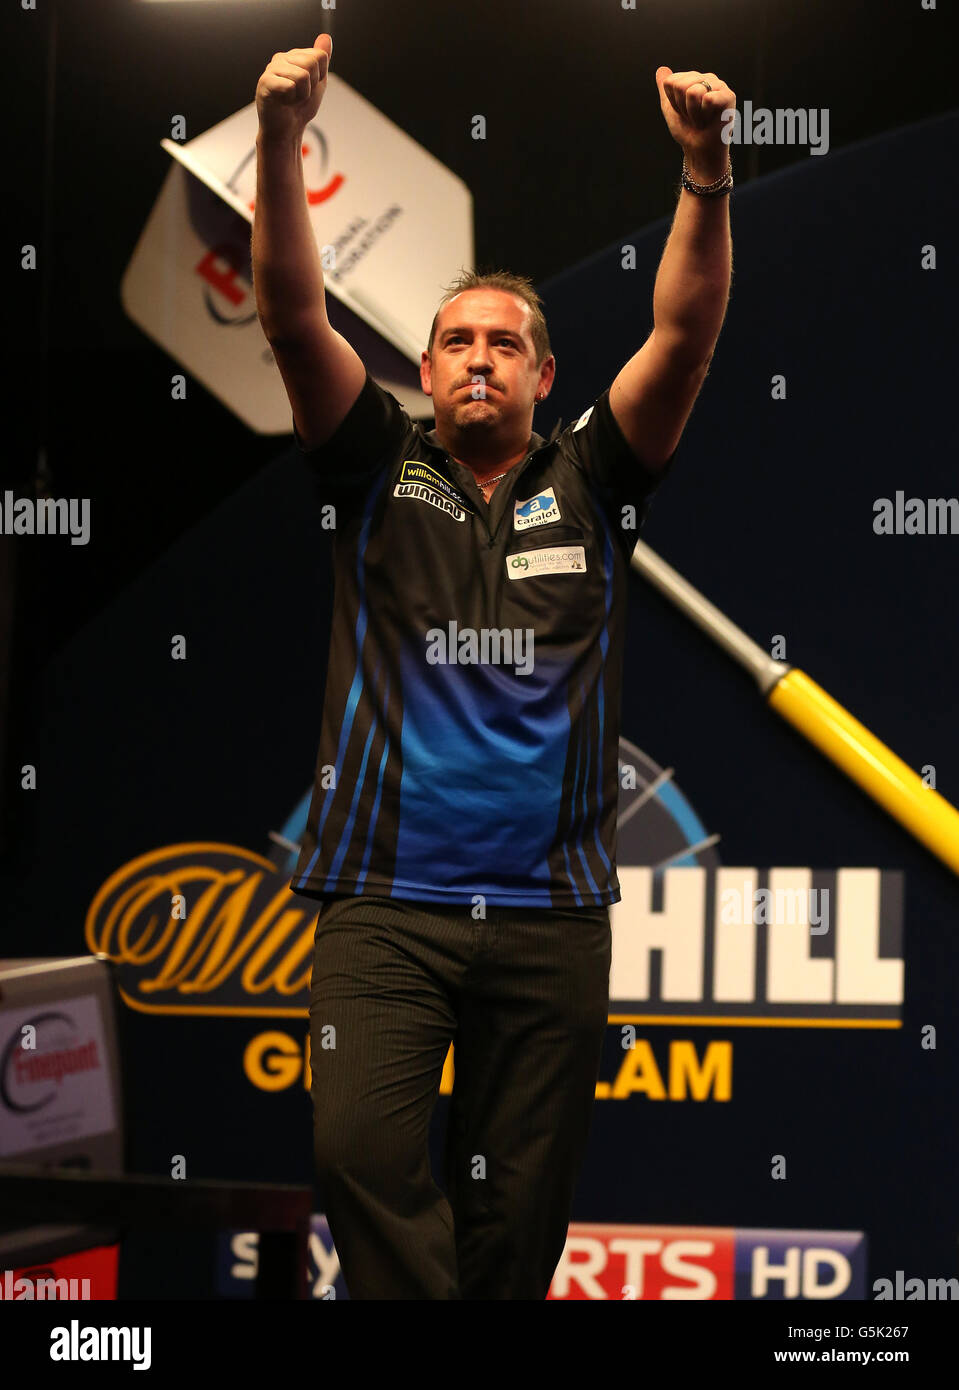 Darts - Grand Slam of Darts - Wolverhampton Civic Hall. Dean Winstanley celebrates victory is his second round match against Arron Monk Stock Photo